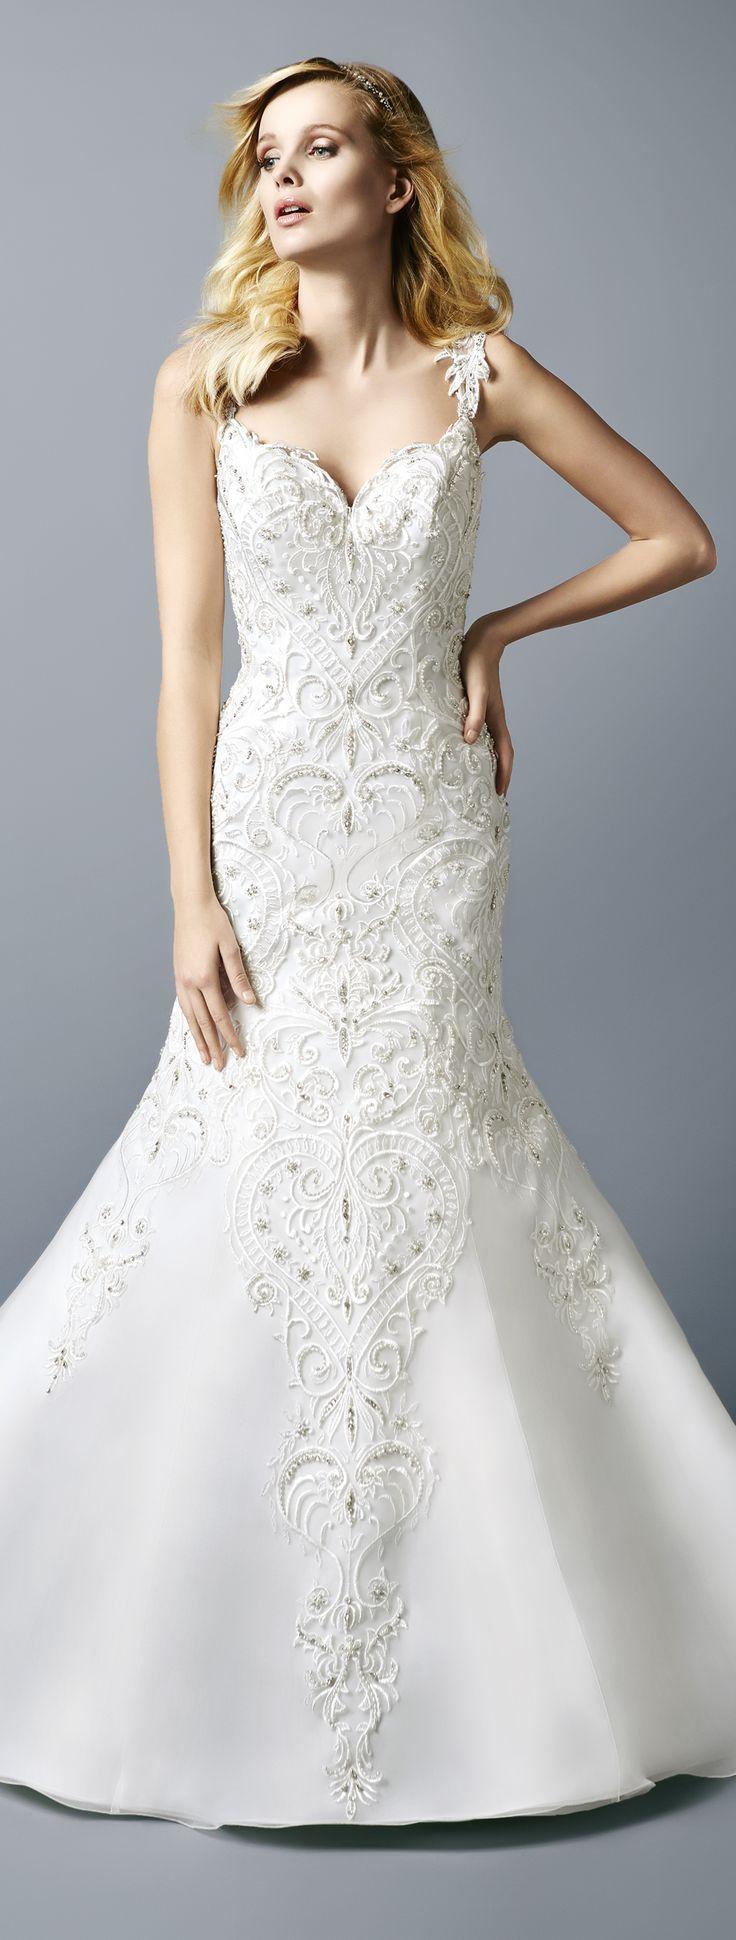 Wedding - SLEEVELESS LACE FIT AND FLARE GOWN WITH LOW KEYHOLE BACK 